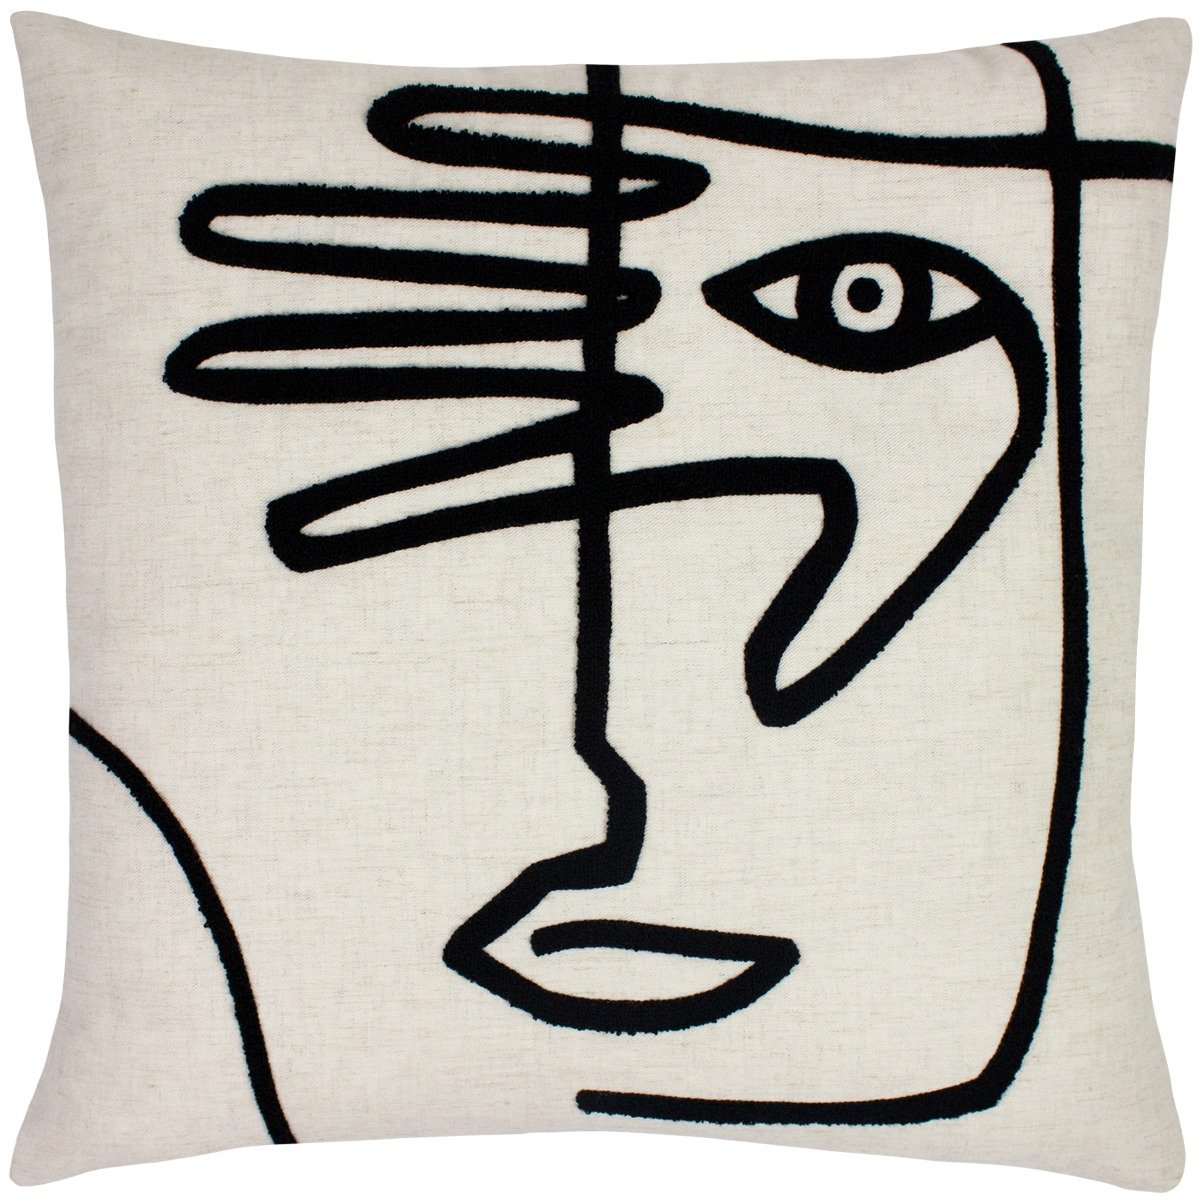 Lined Face Cushion, Square, Neutral | Barker & Stonehouse